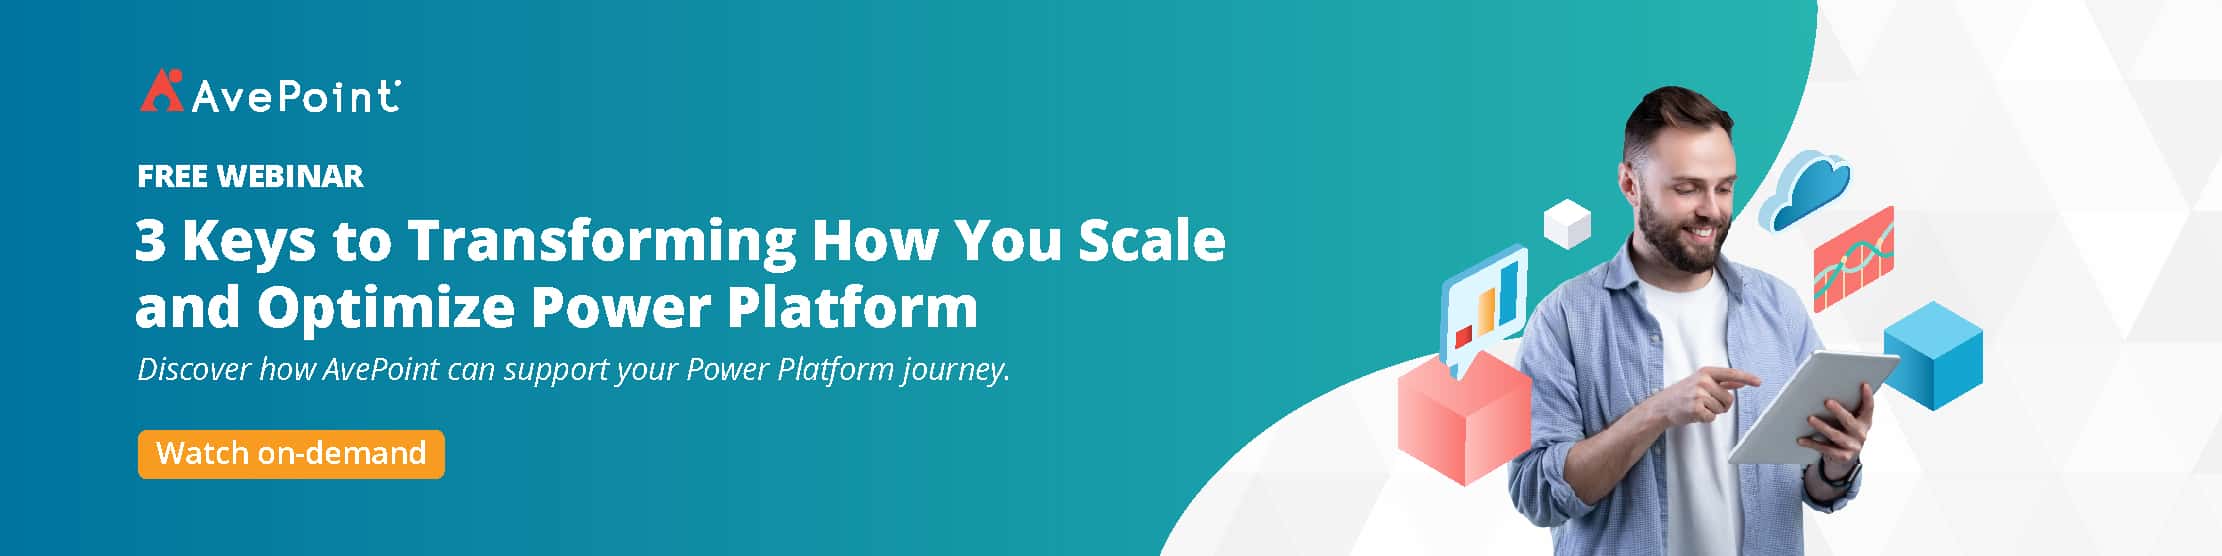 3 Keys to Transforming How You Scale and Optimize Power Platform webinar banner